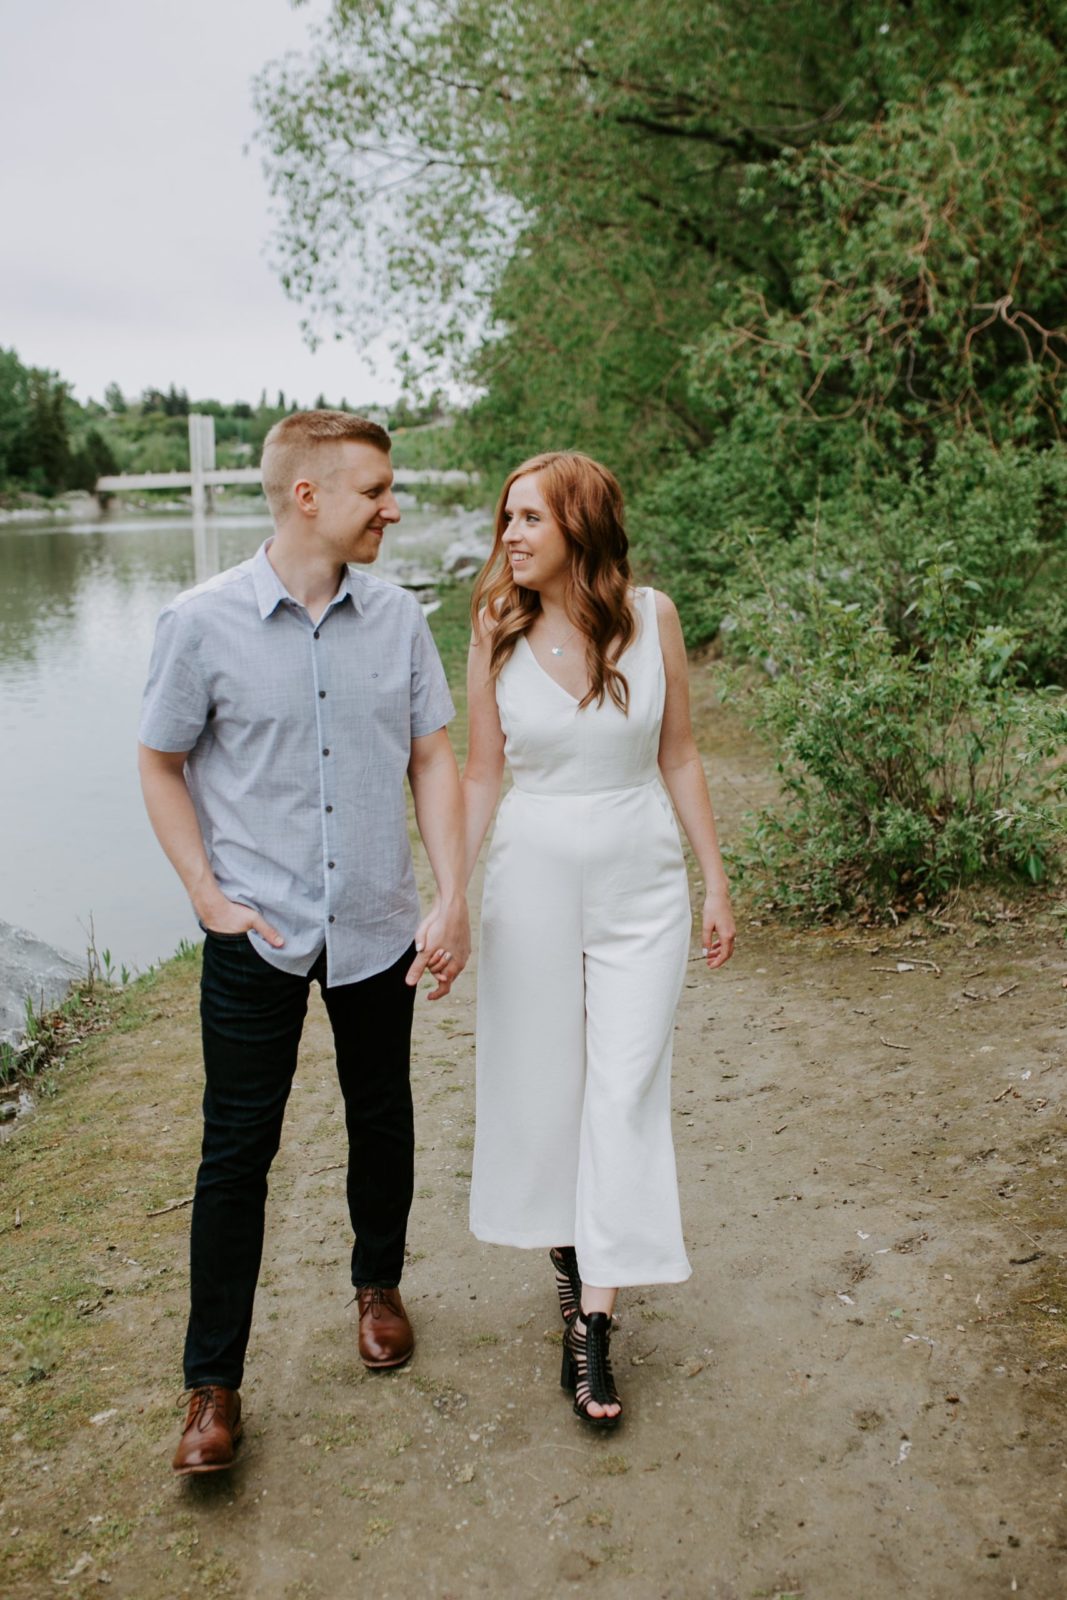 Engagement session outfit tips from Deanna Rachel Photography